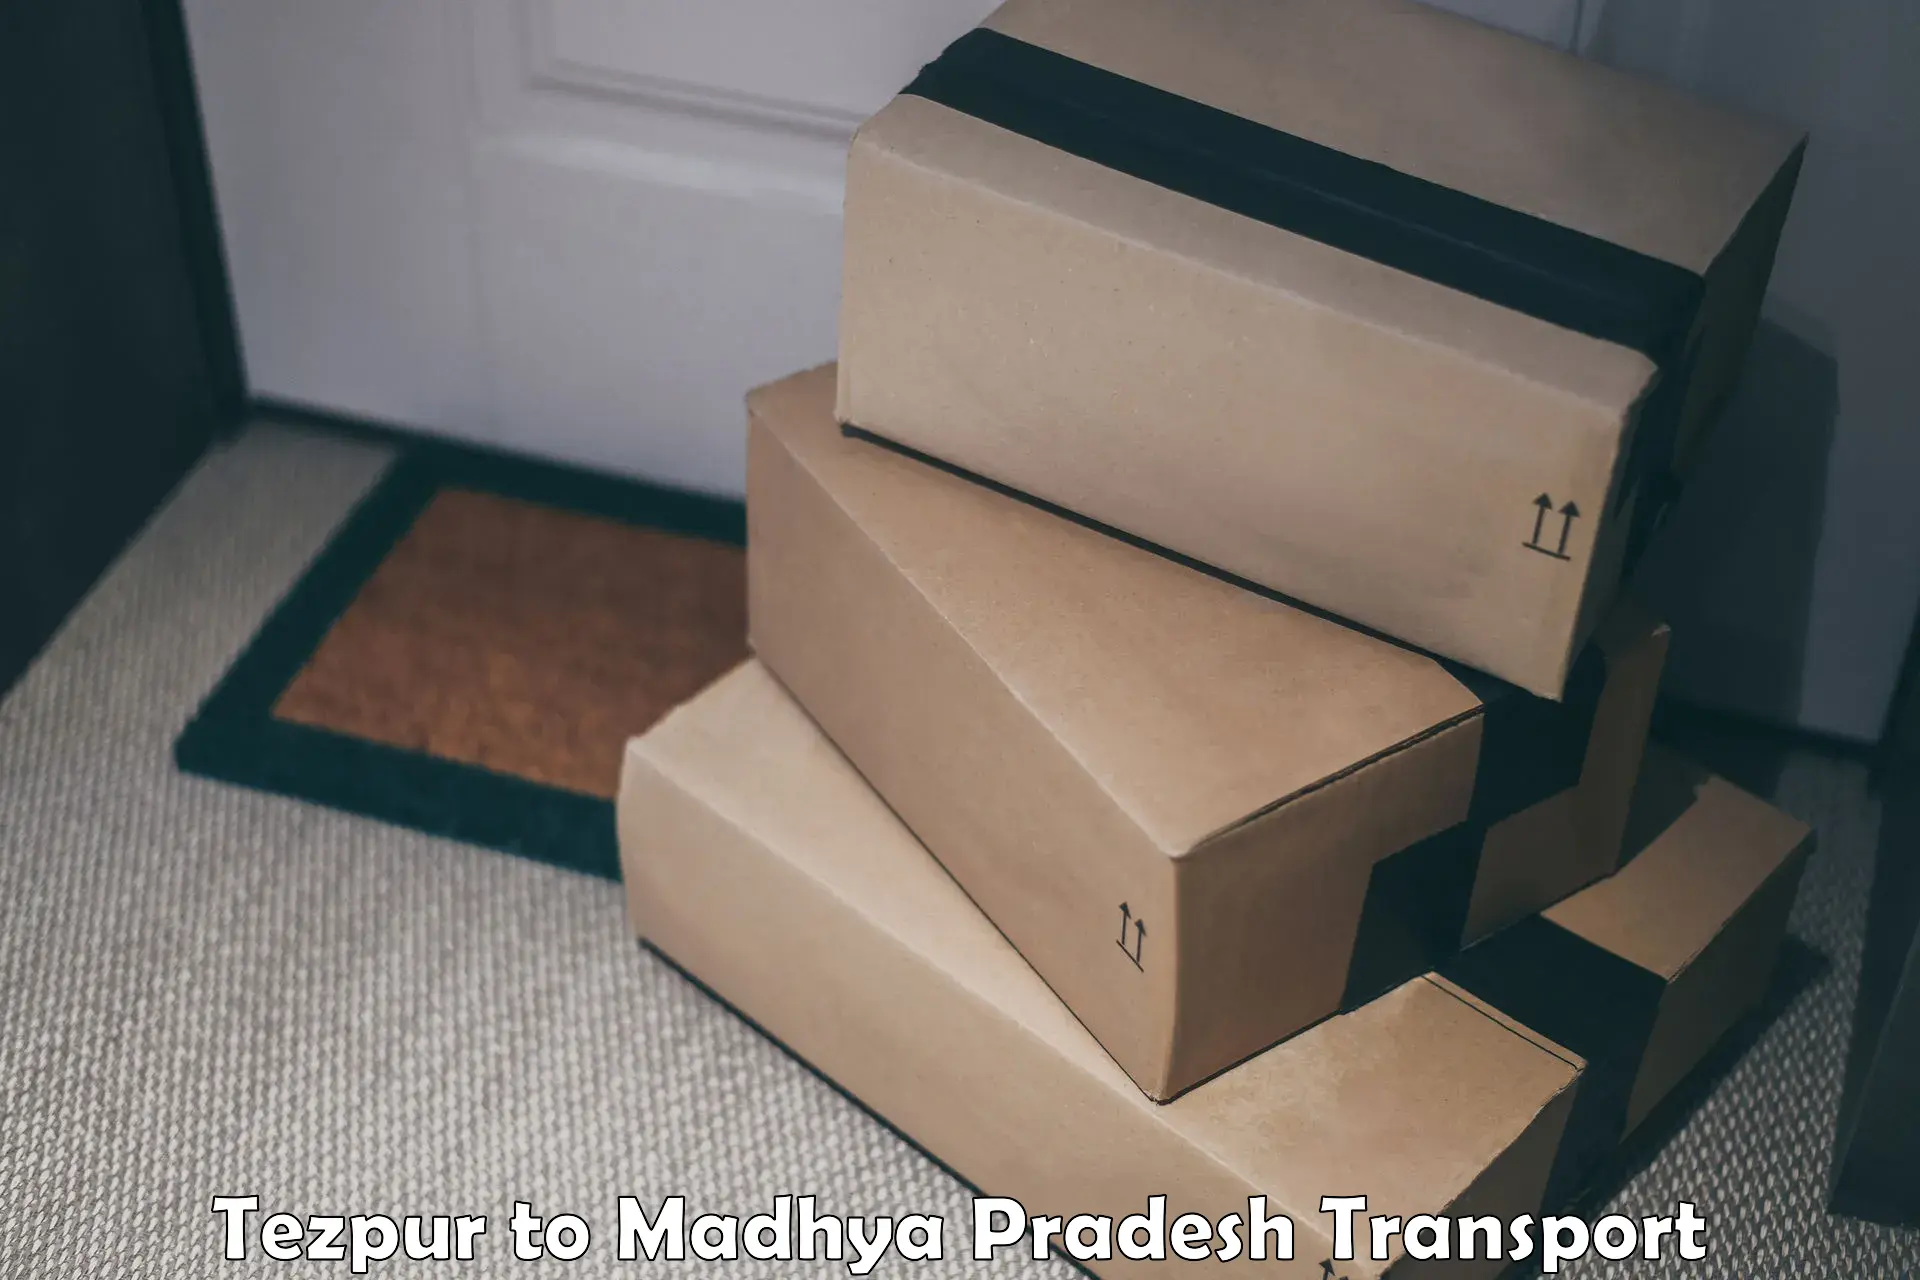 Goods delivery service Tezpur to Udaipura